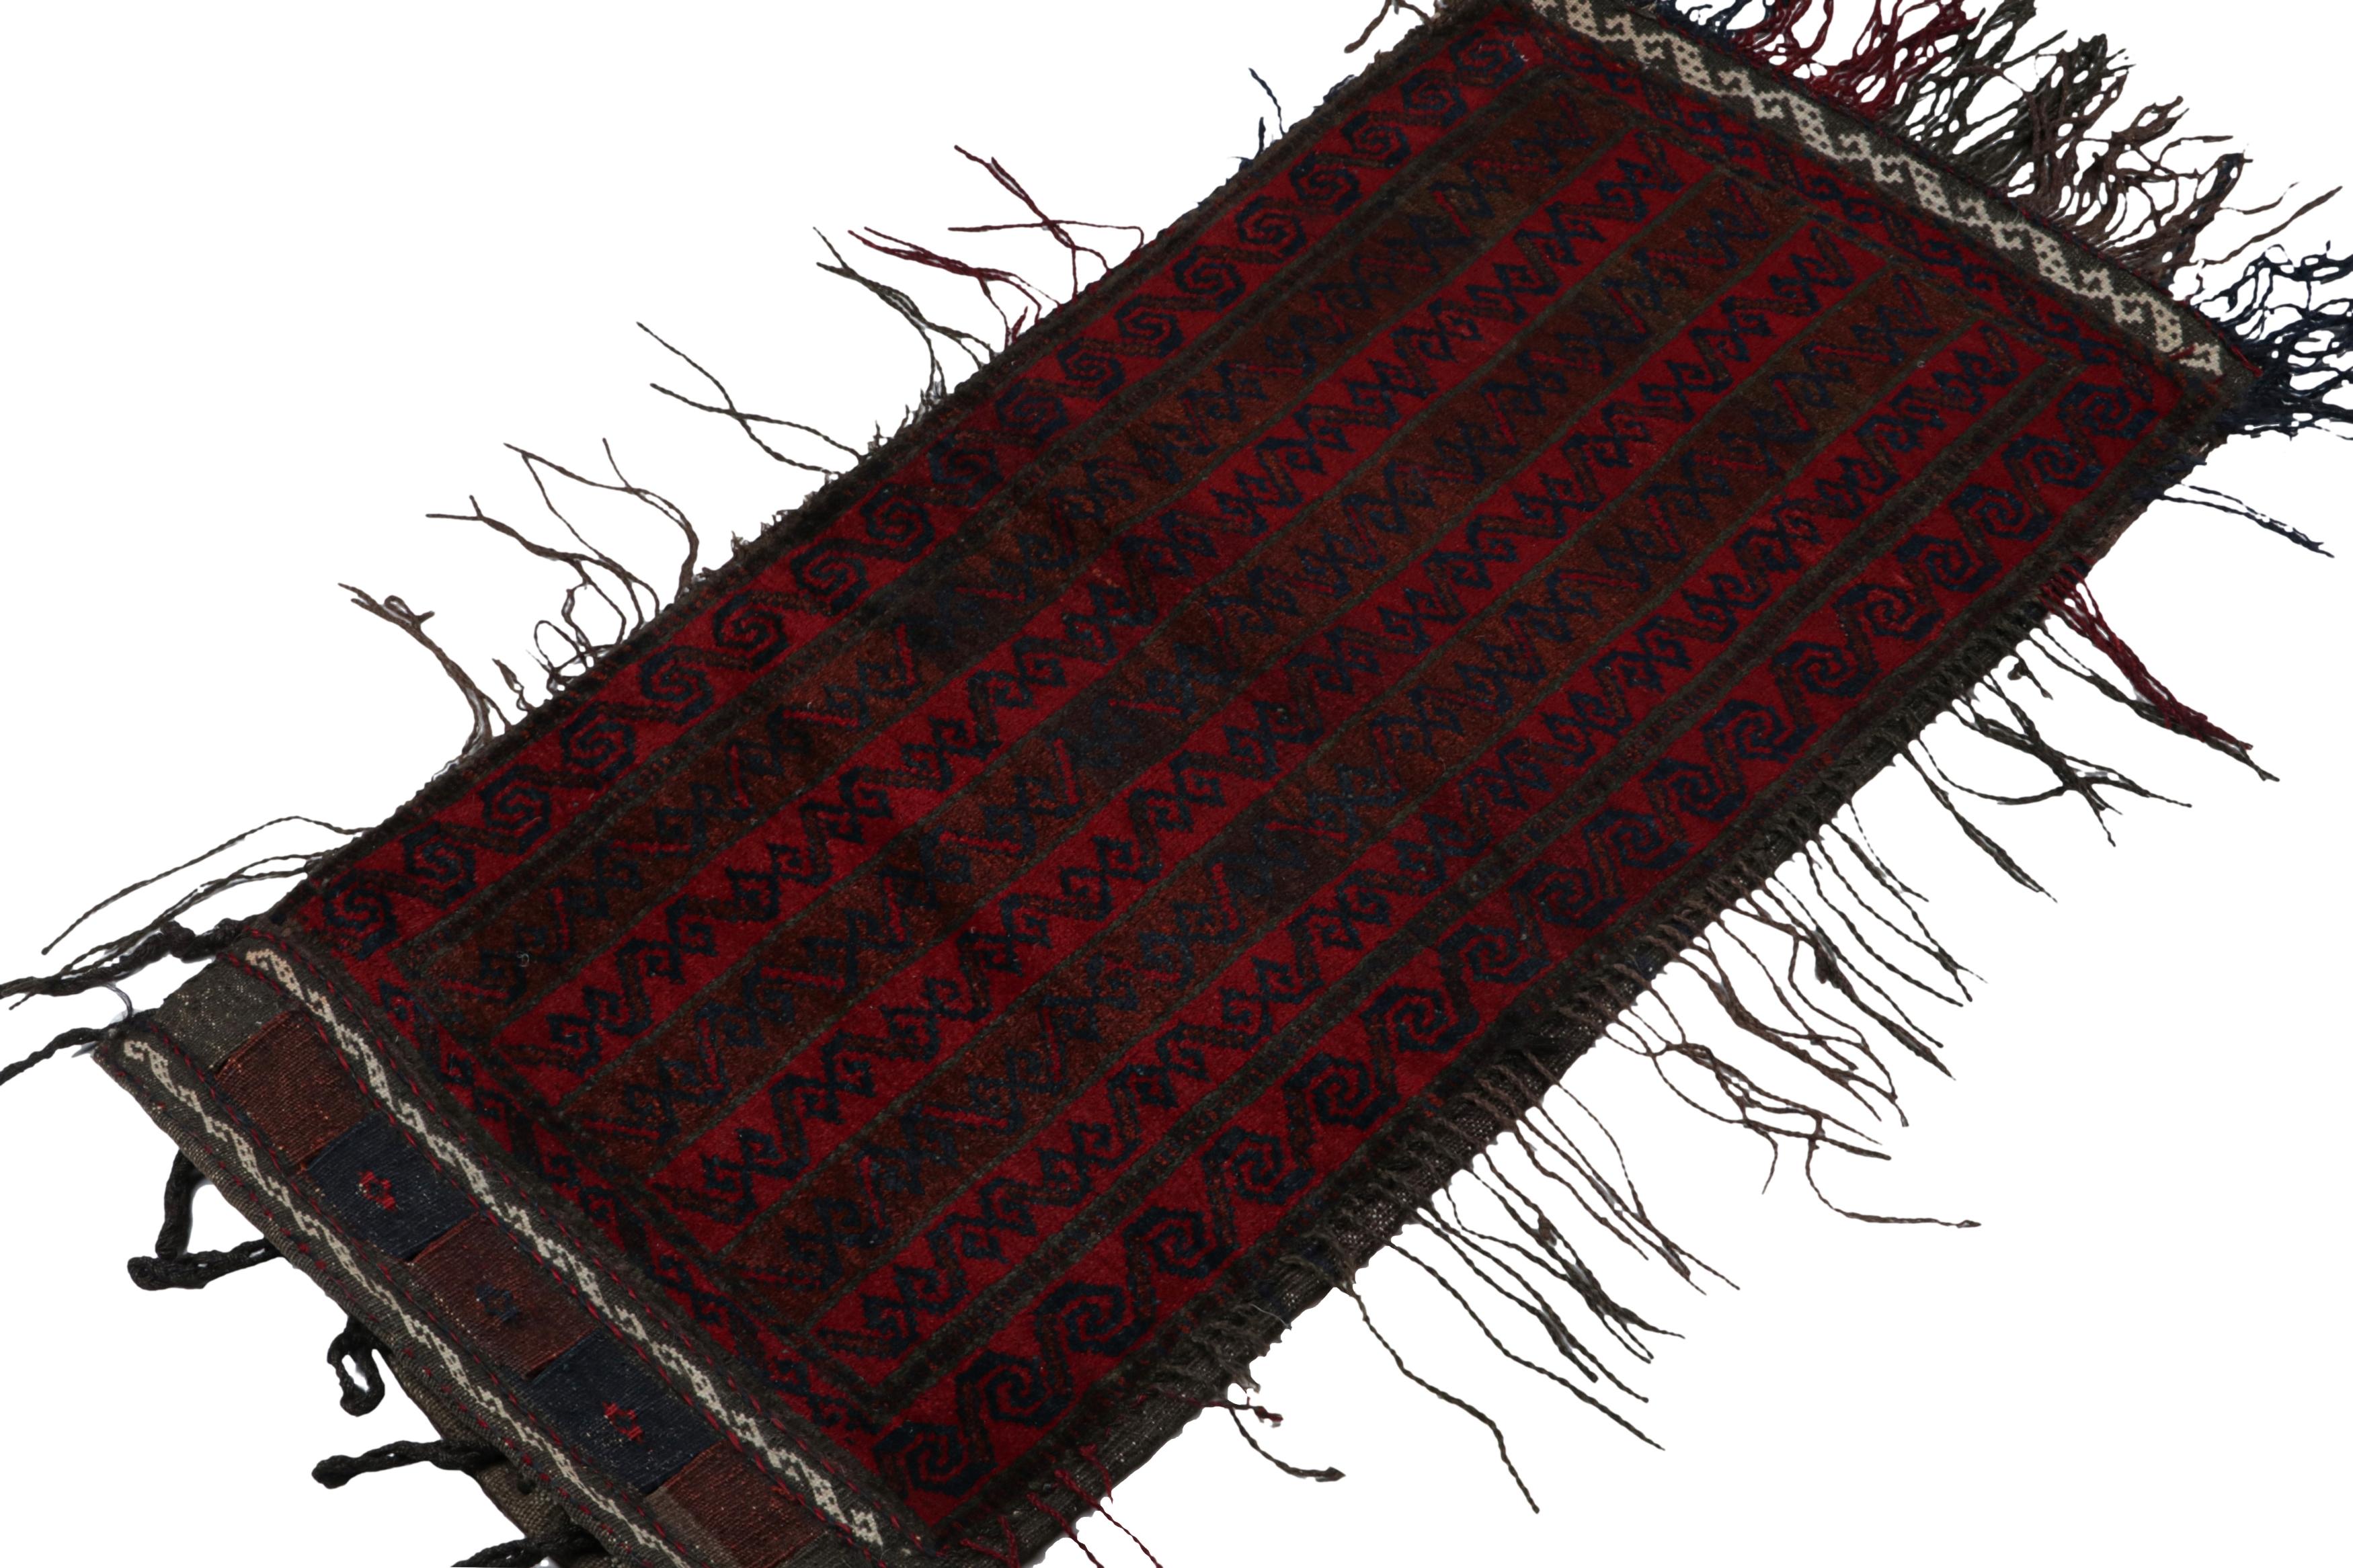 Hand-knotted in wool, this 1x3 Baluch Persian rug of the 1950s is the latest to enter Rug & Kilim’s Antique & Vintage collection.

On the Design:

This vintage rug enjoy rich tones of brown, red and blue with geometric patterns in stripes and